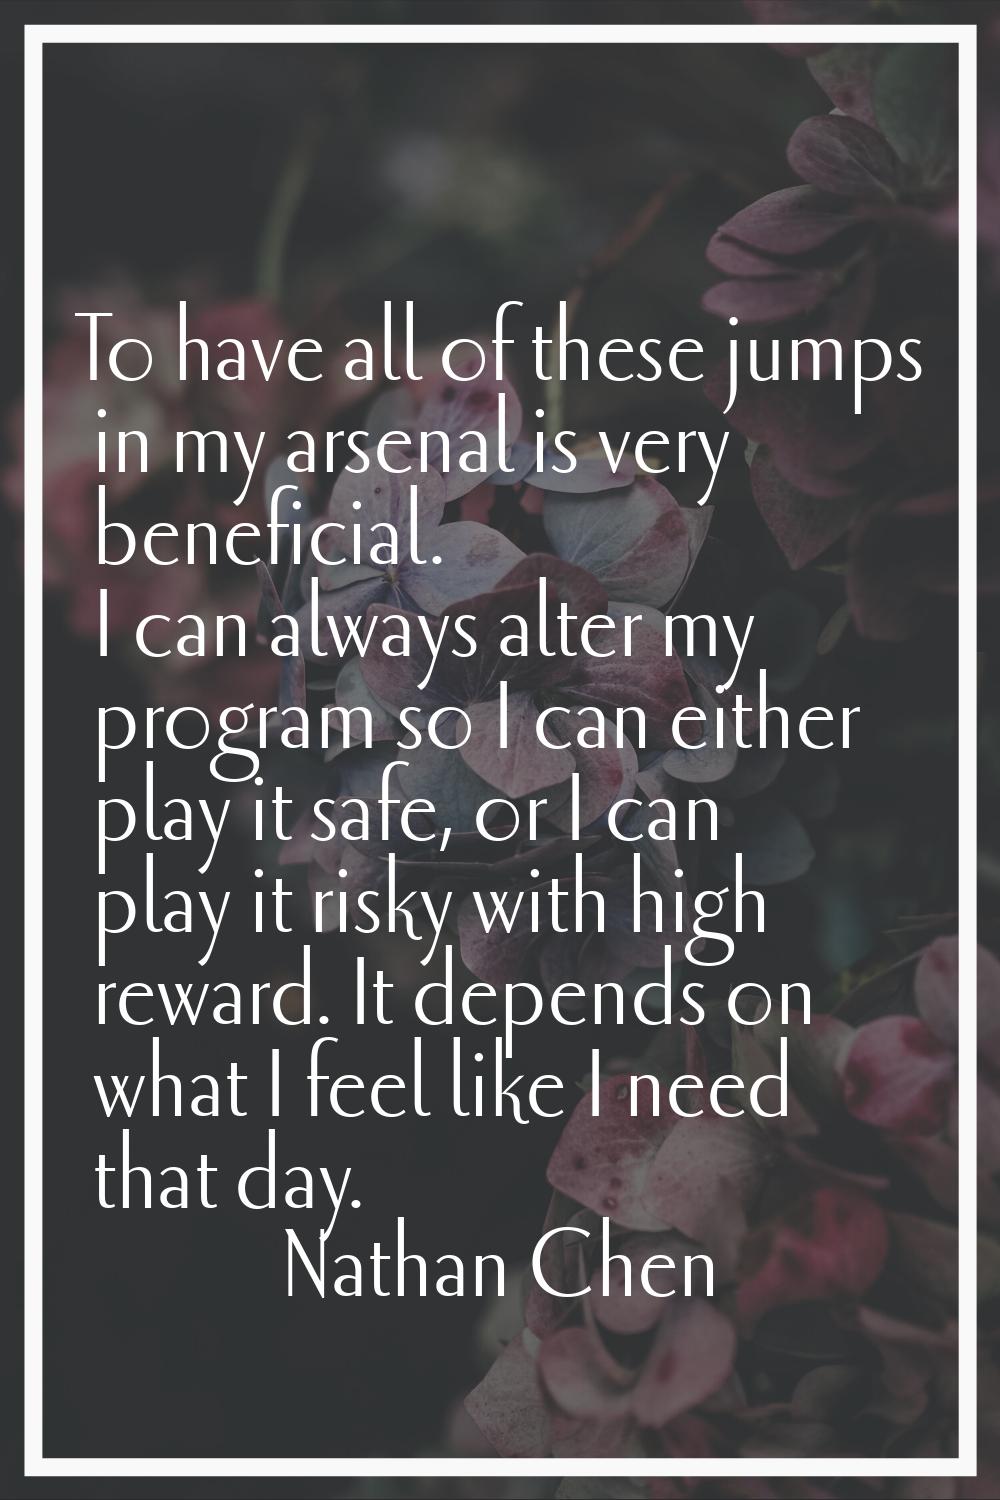 To have all of these jumps in my arsenal is very beneficial. I can always alter my program so I can